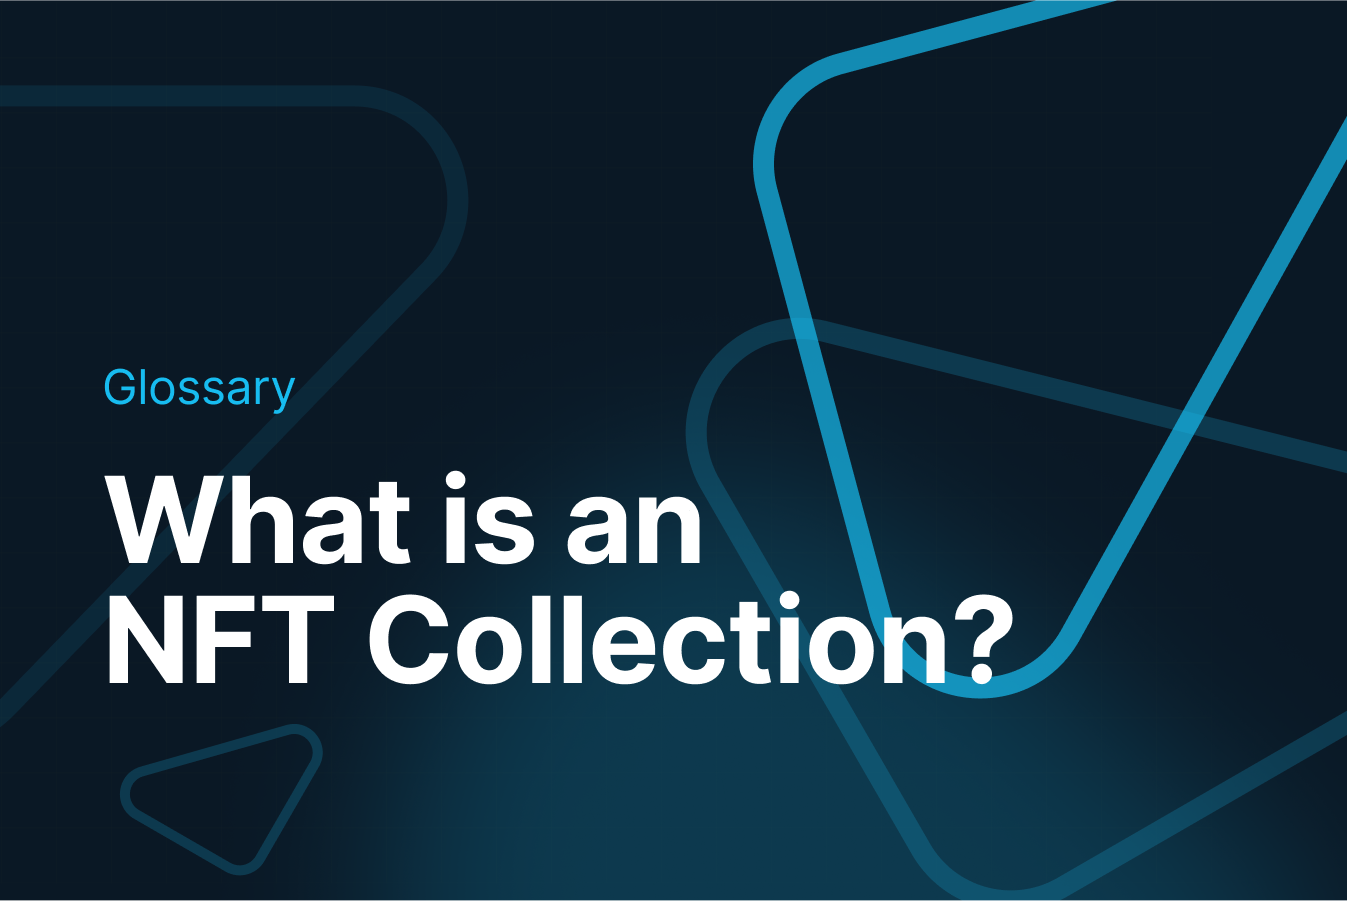 What is an NFT collection